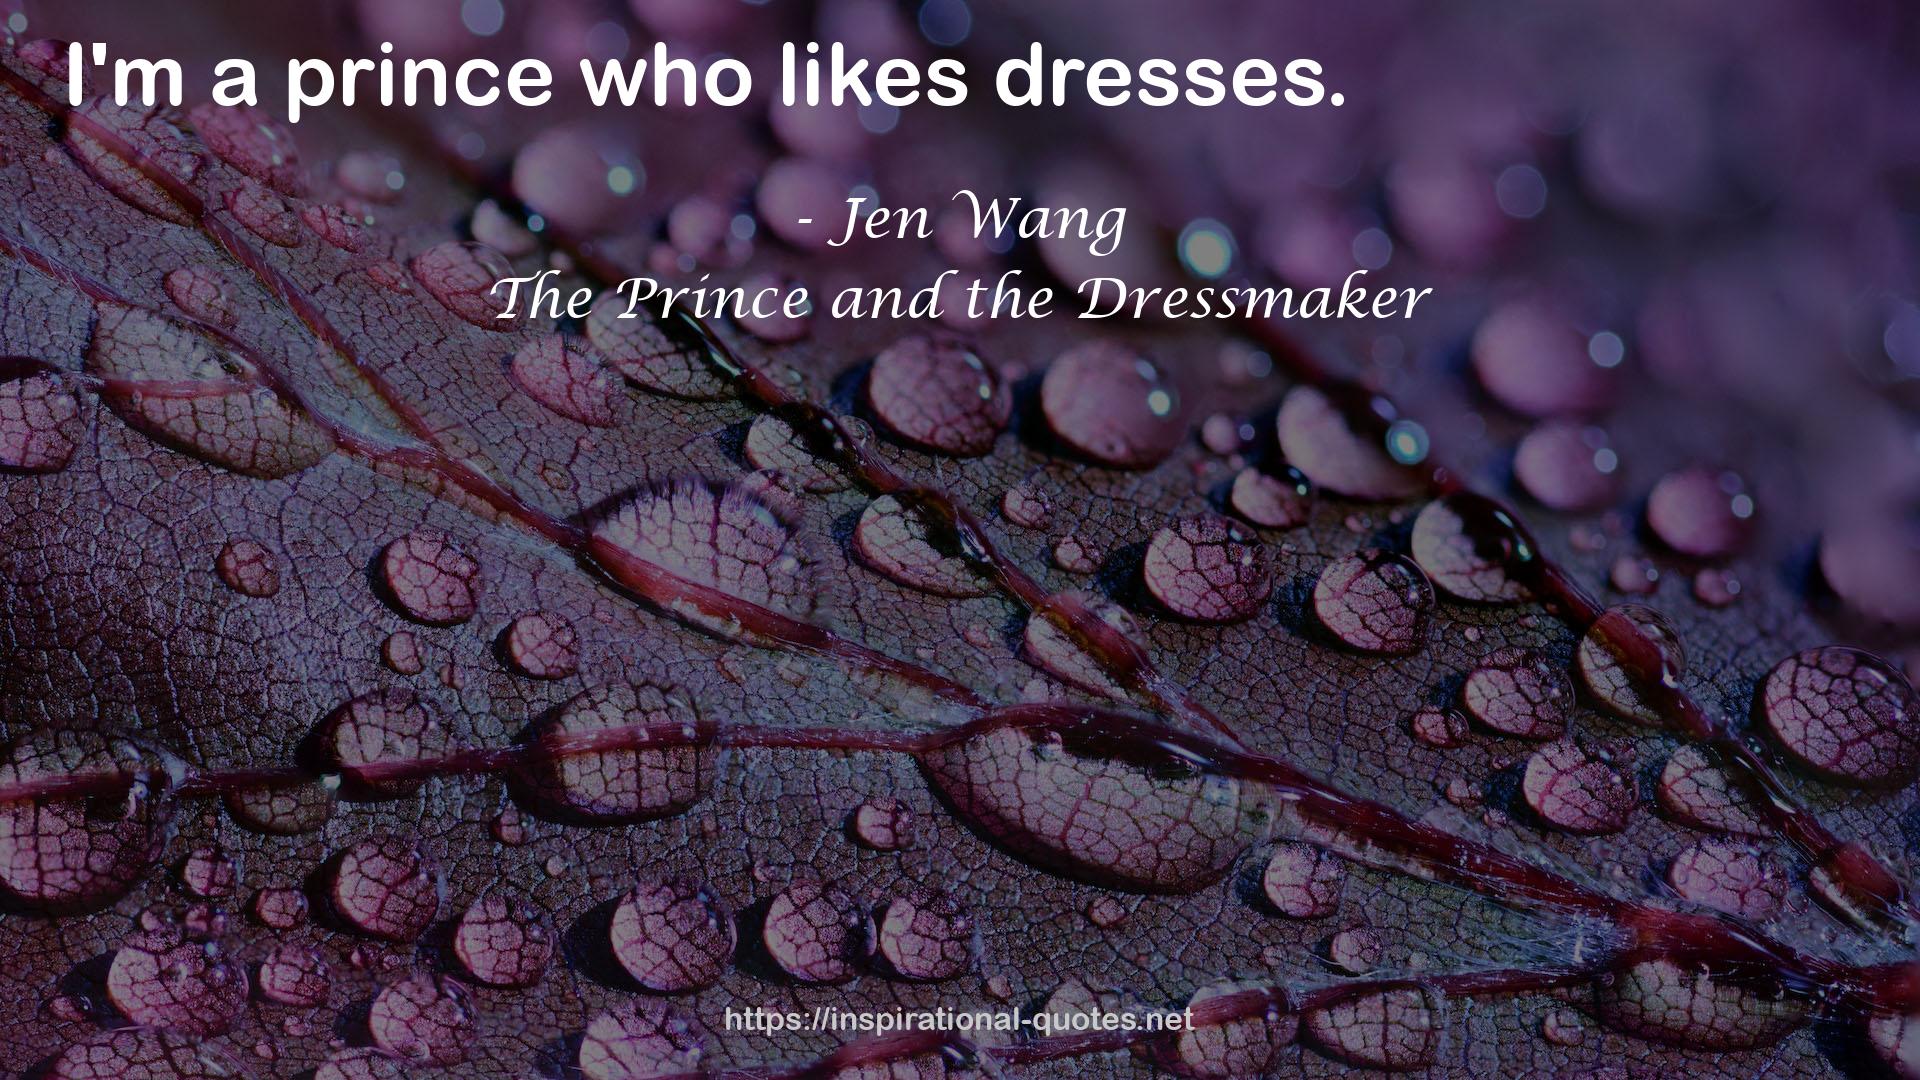 The Prince and the Dressmaker QUOTES